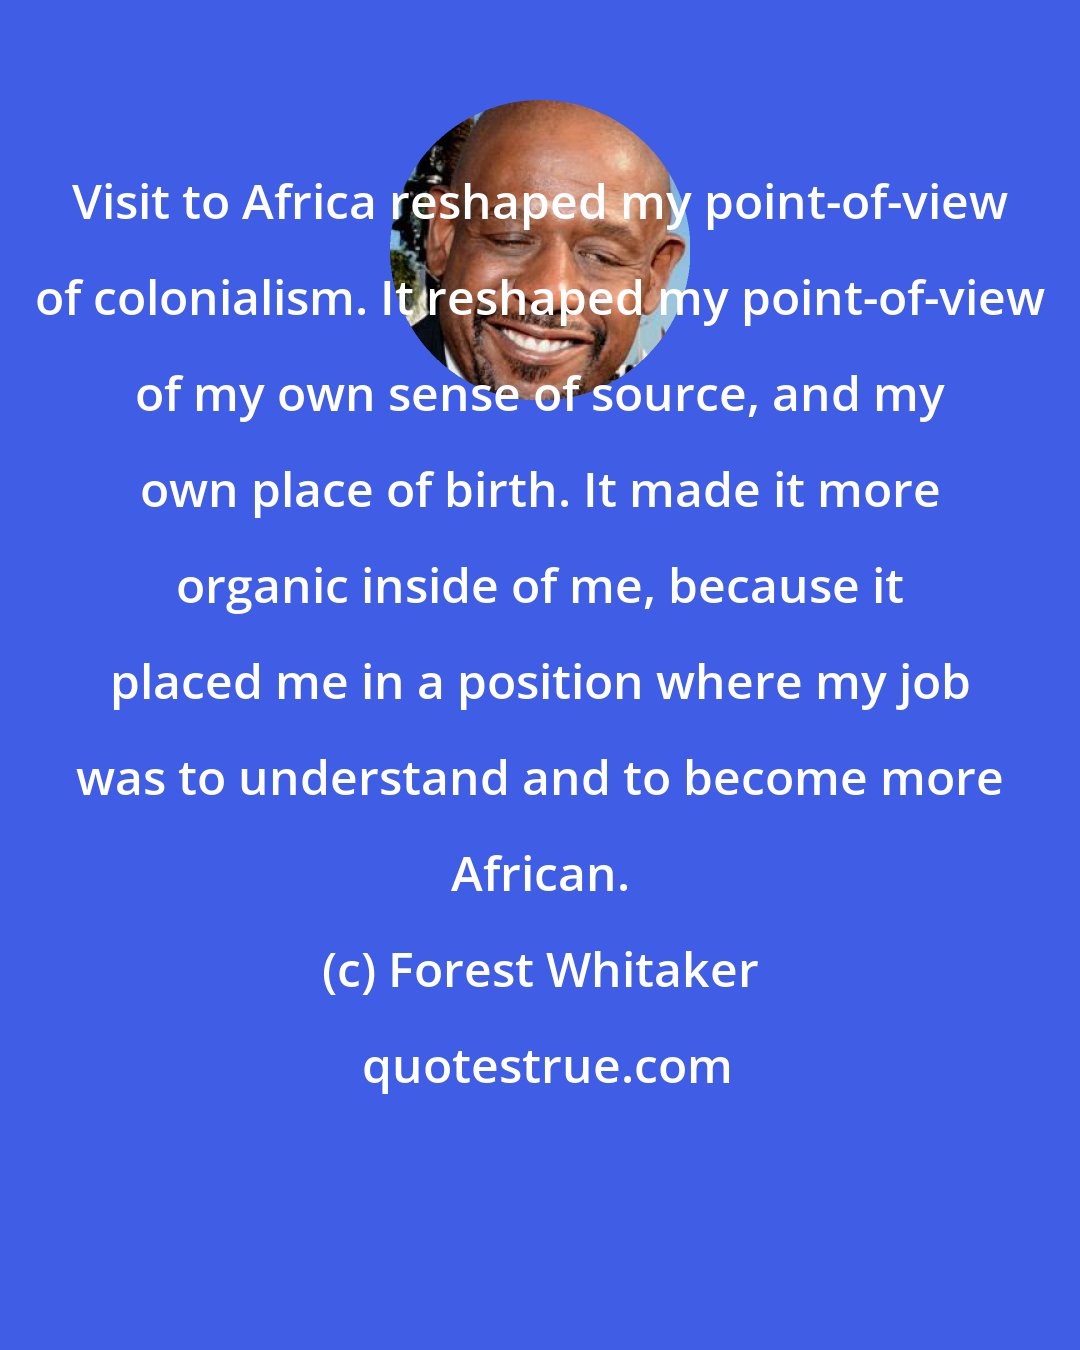 Forest Whitaker: Visit to Africa reshaped my point-of-view of colonialism. It reshaped my point-of-view of my own sense of source, and my own place of birth. It made it more organic inside of me, because it placed me in a position where my job was to understand and to become more African.